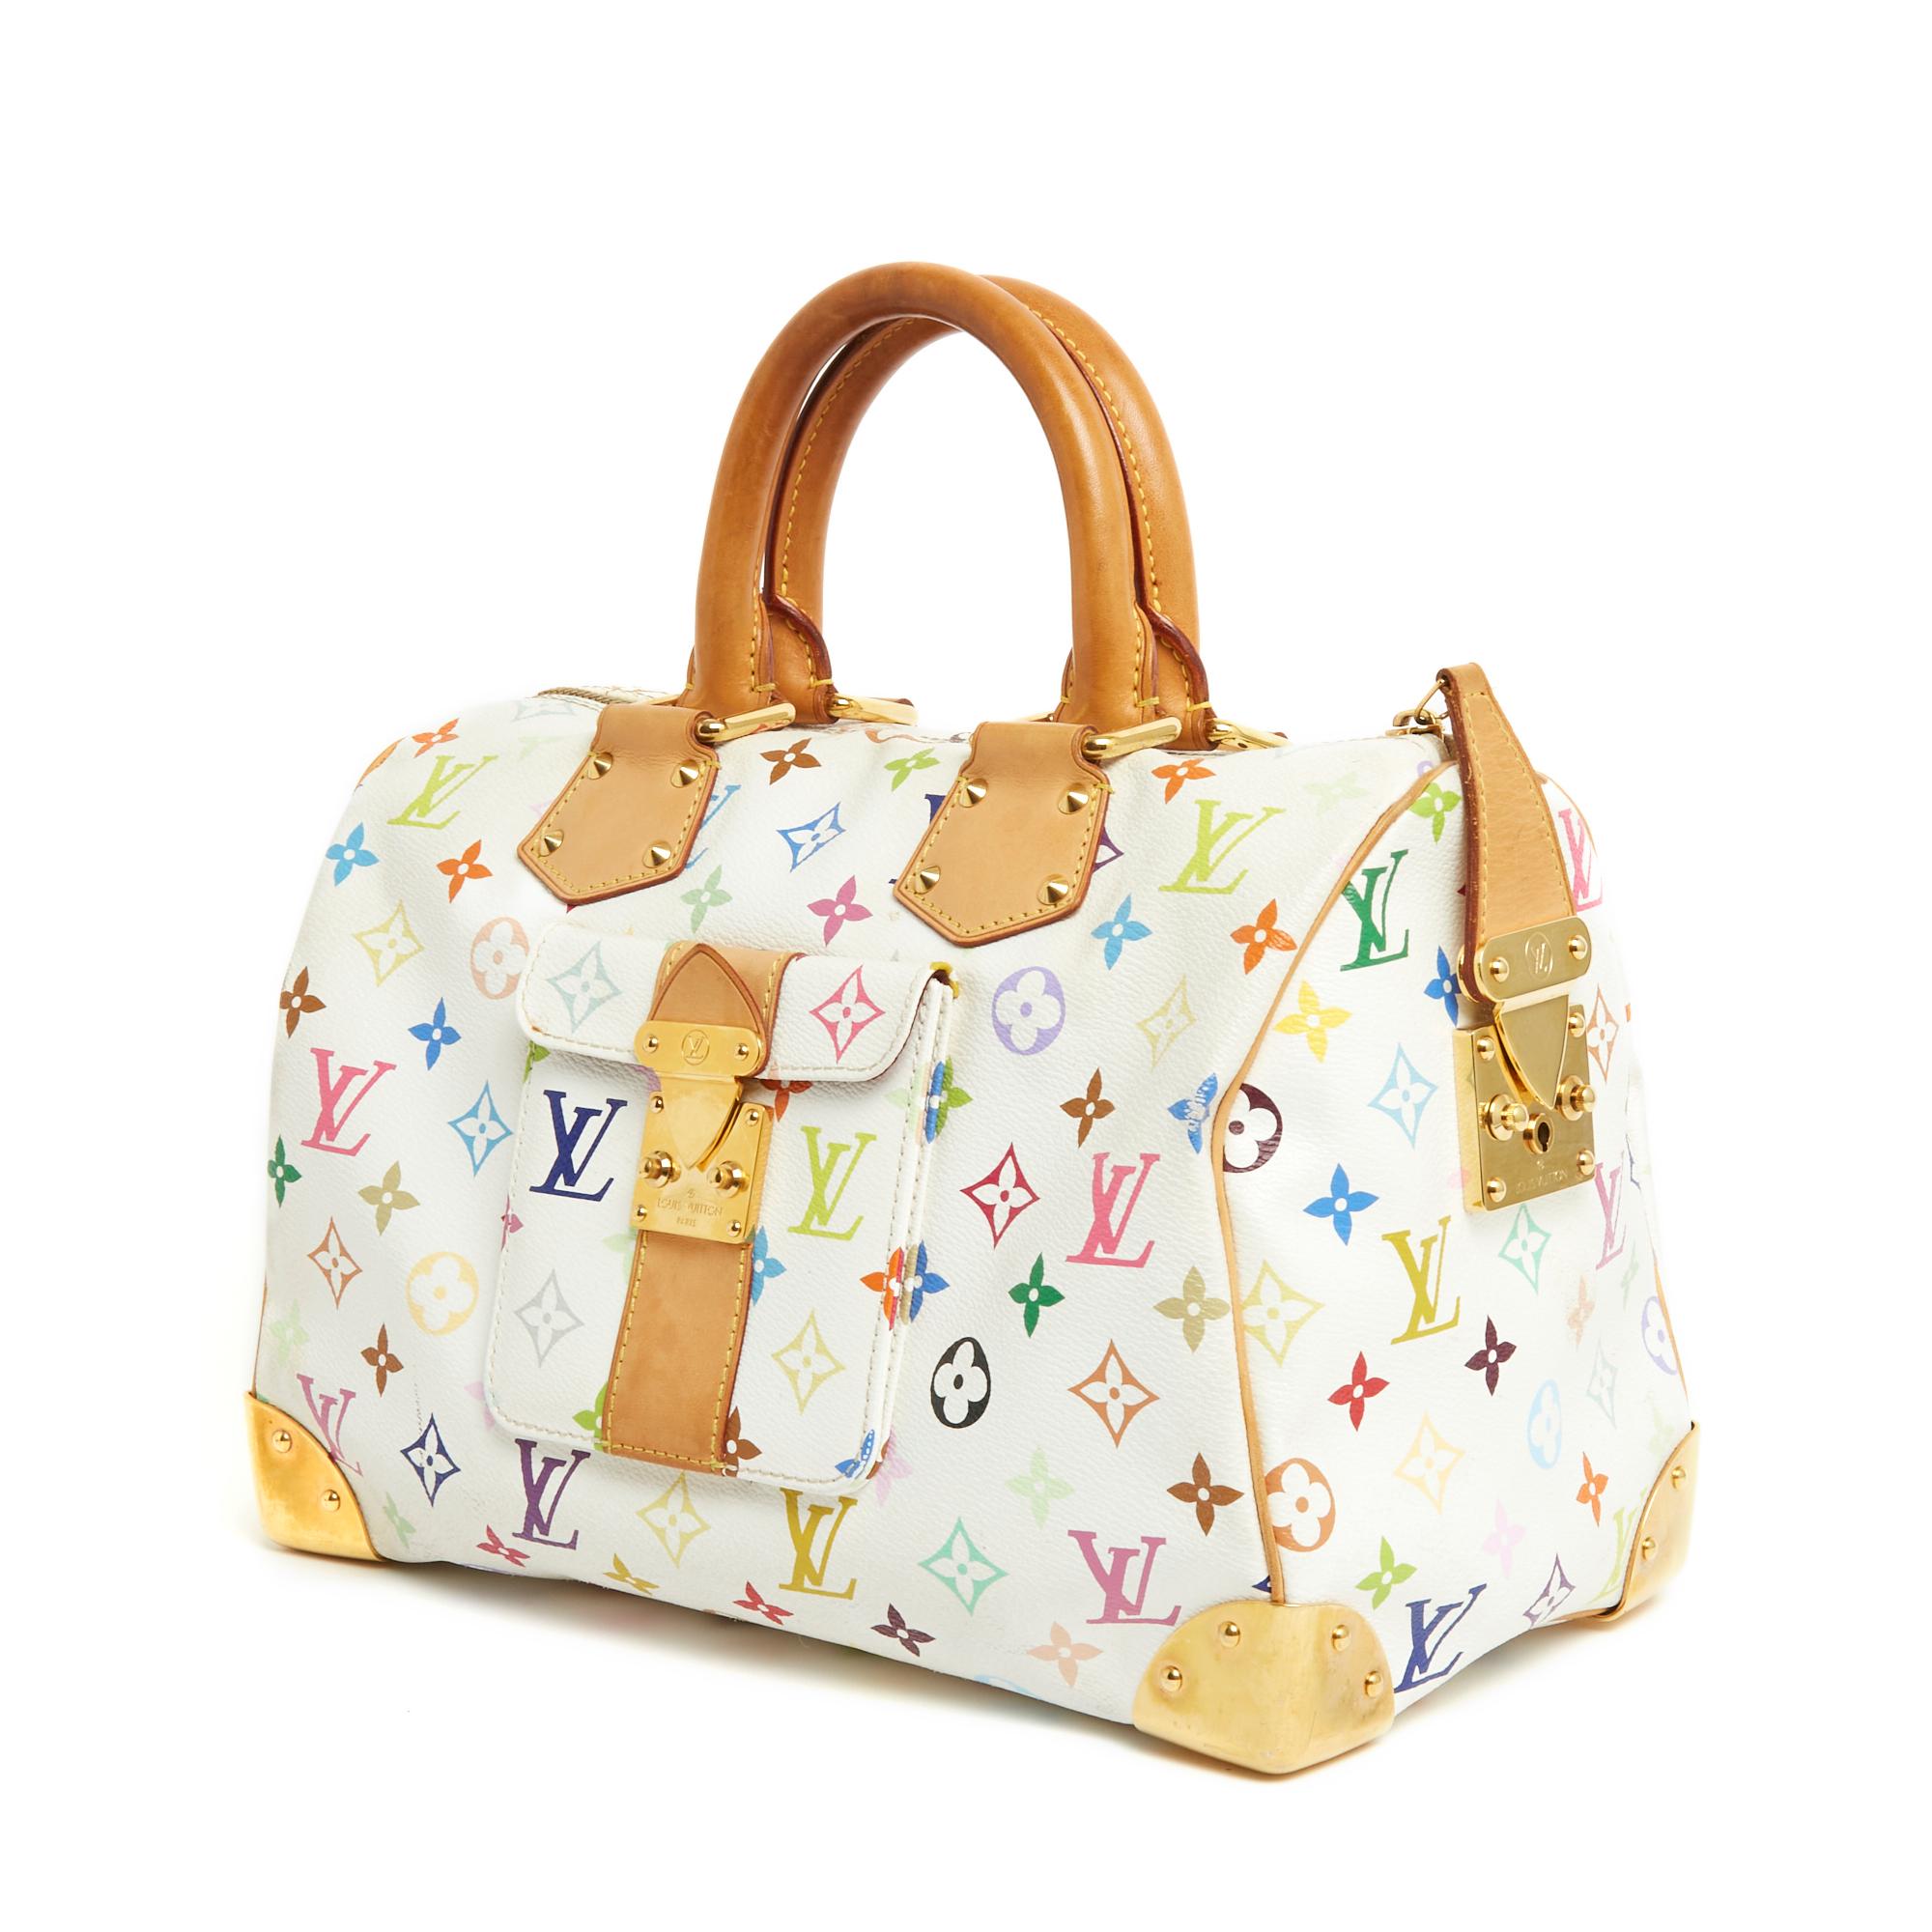 Louis Vuitton Speedy 30 Bandoulière model bag by Murakami in white Monogram canvas with colorful patterns, inserts in natural leather and gold metal, interior in red suede with a patch pocket, the whole closed with a large gold metal buckle with the